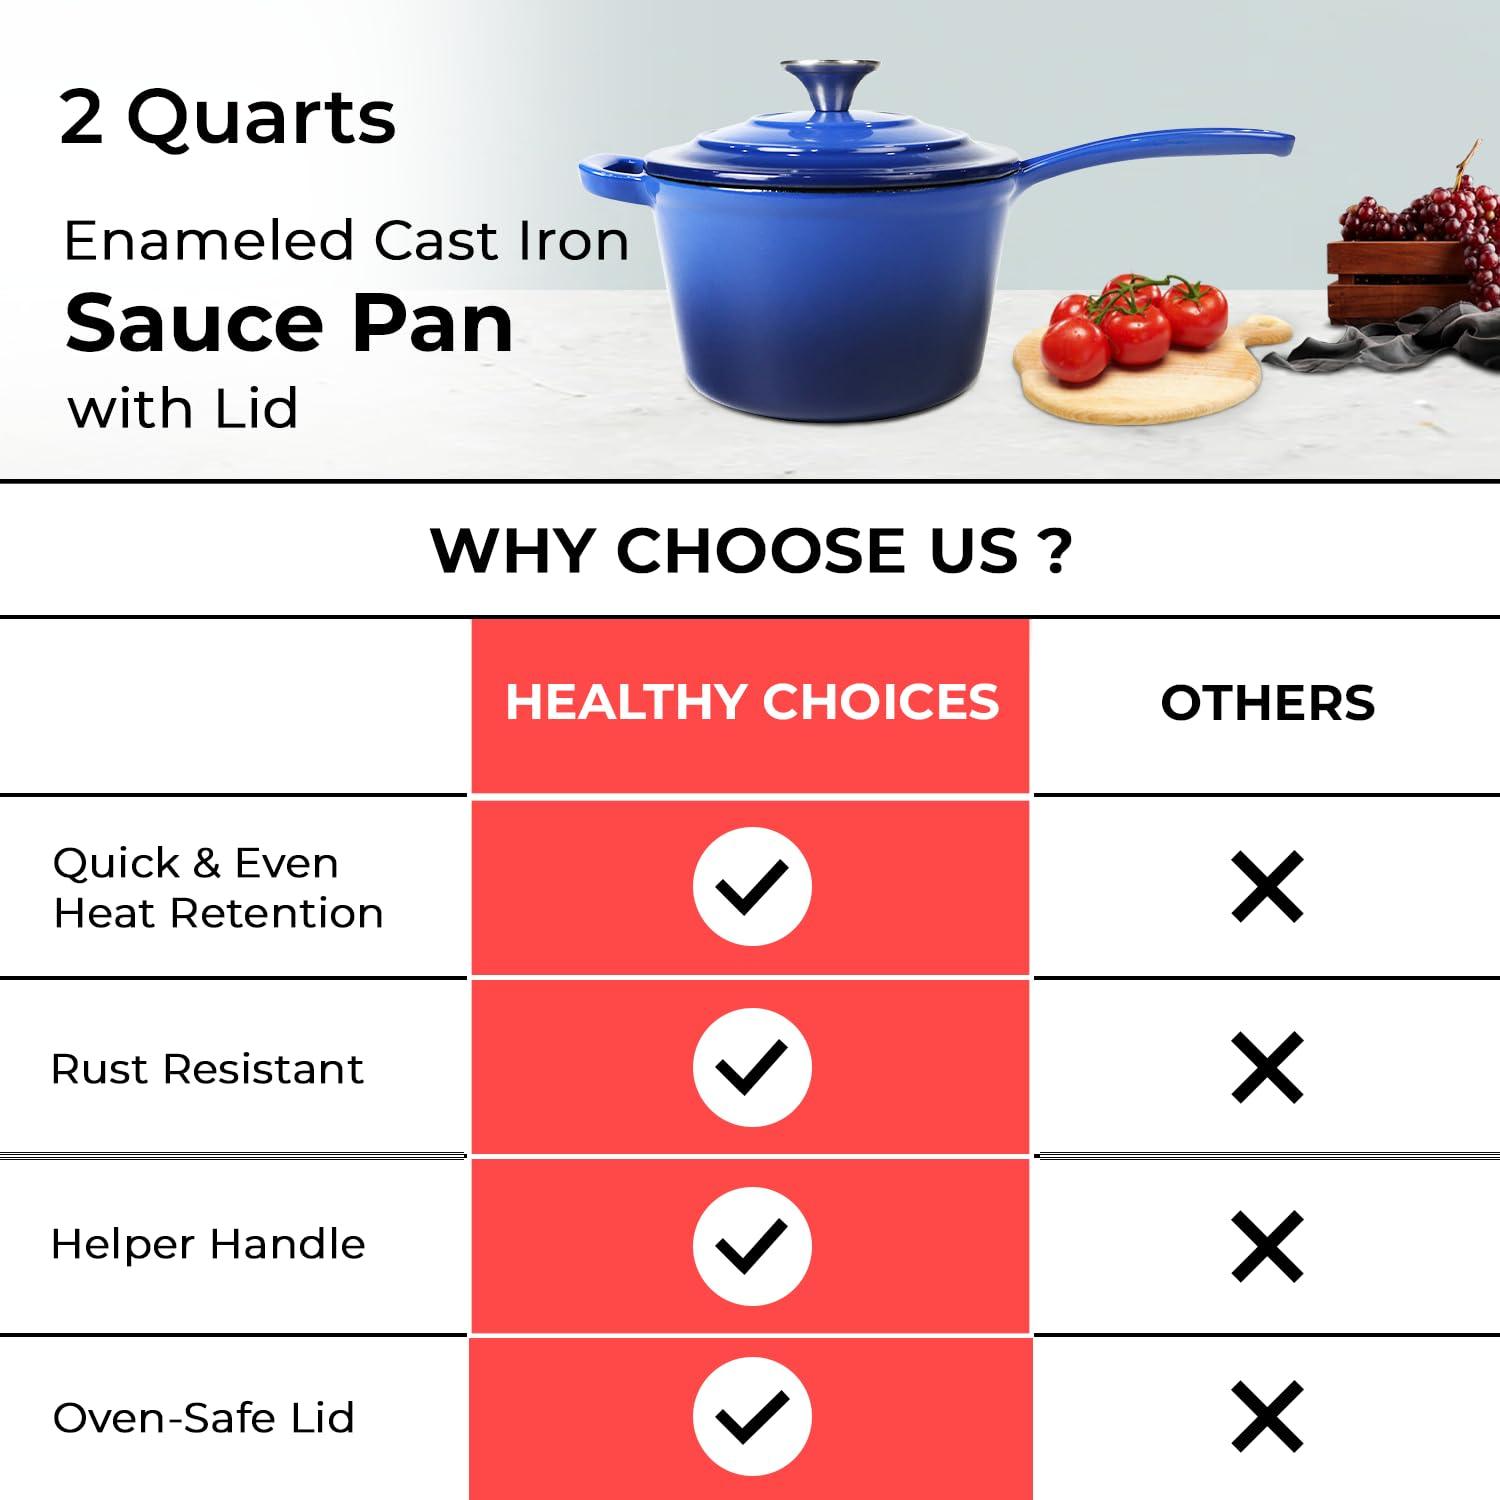 Healthy Choices 2 Qt Enamel Cast Iron Sauce Pot with Lid, Blue Sauce Pan for Small Servings of Pasta Sauce/Gravy, Wedding Gift Ideas, Even Heat Distribution, Dishwasher Safe, All Cooktops - Upto 500°F - CookCave